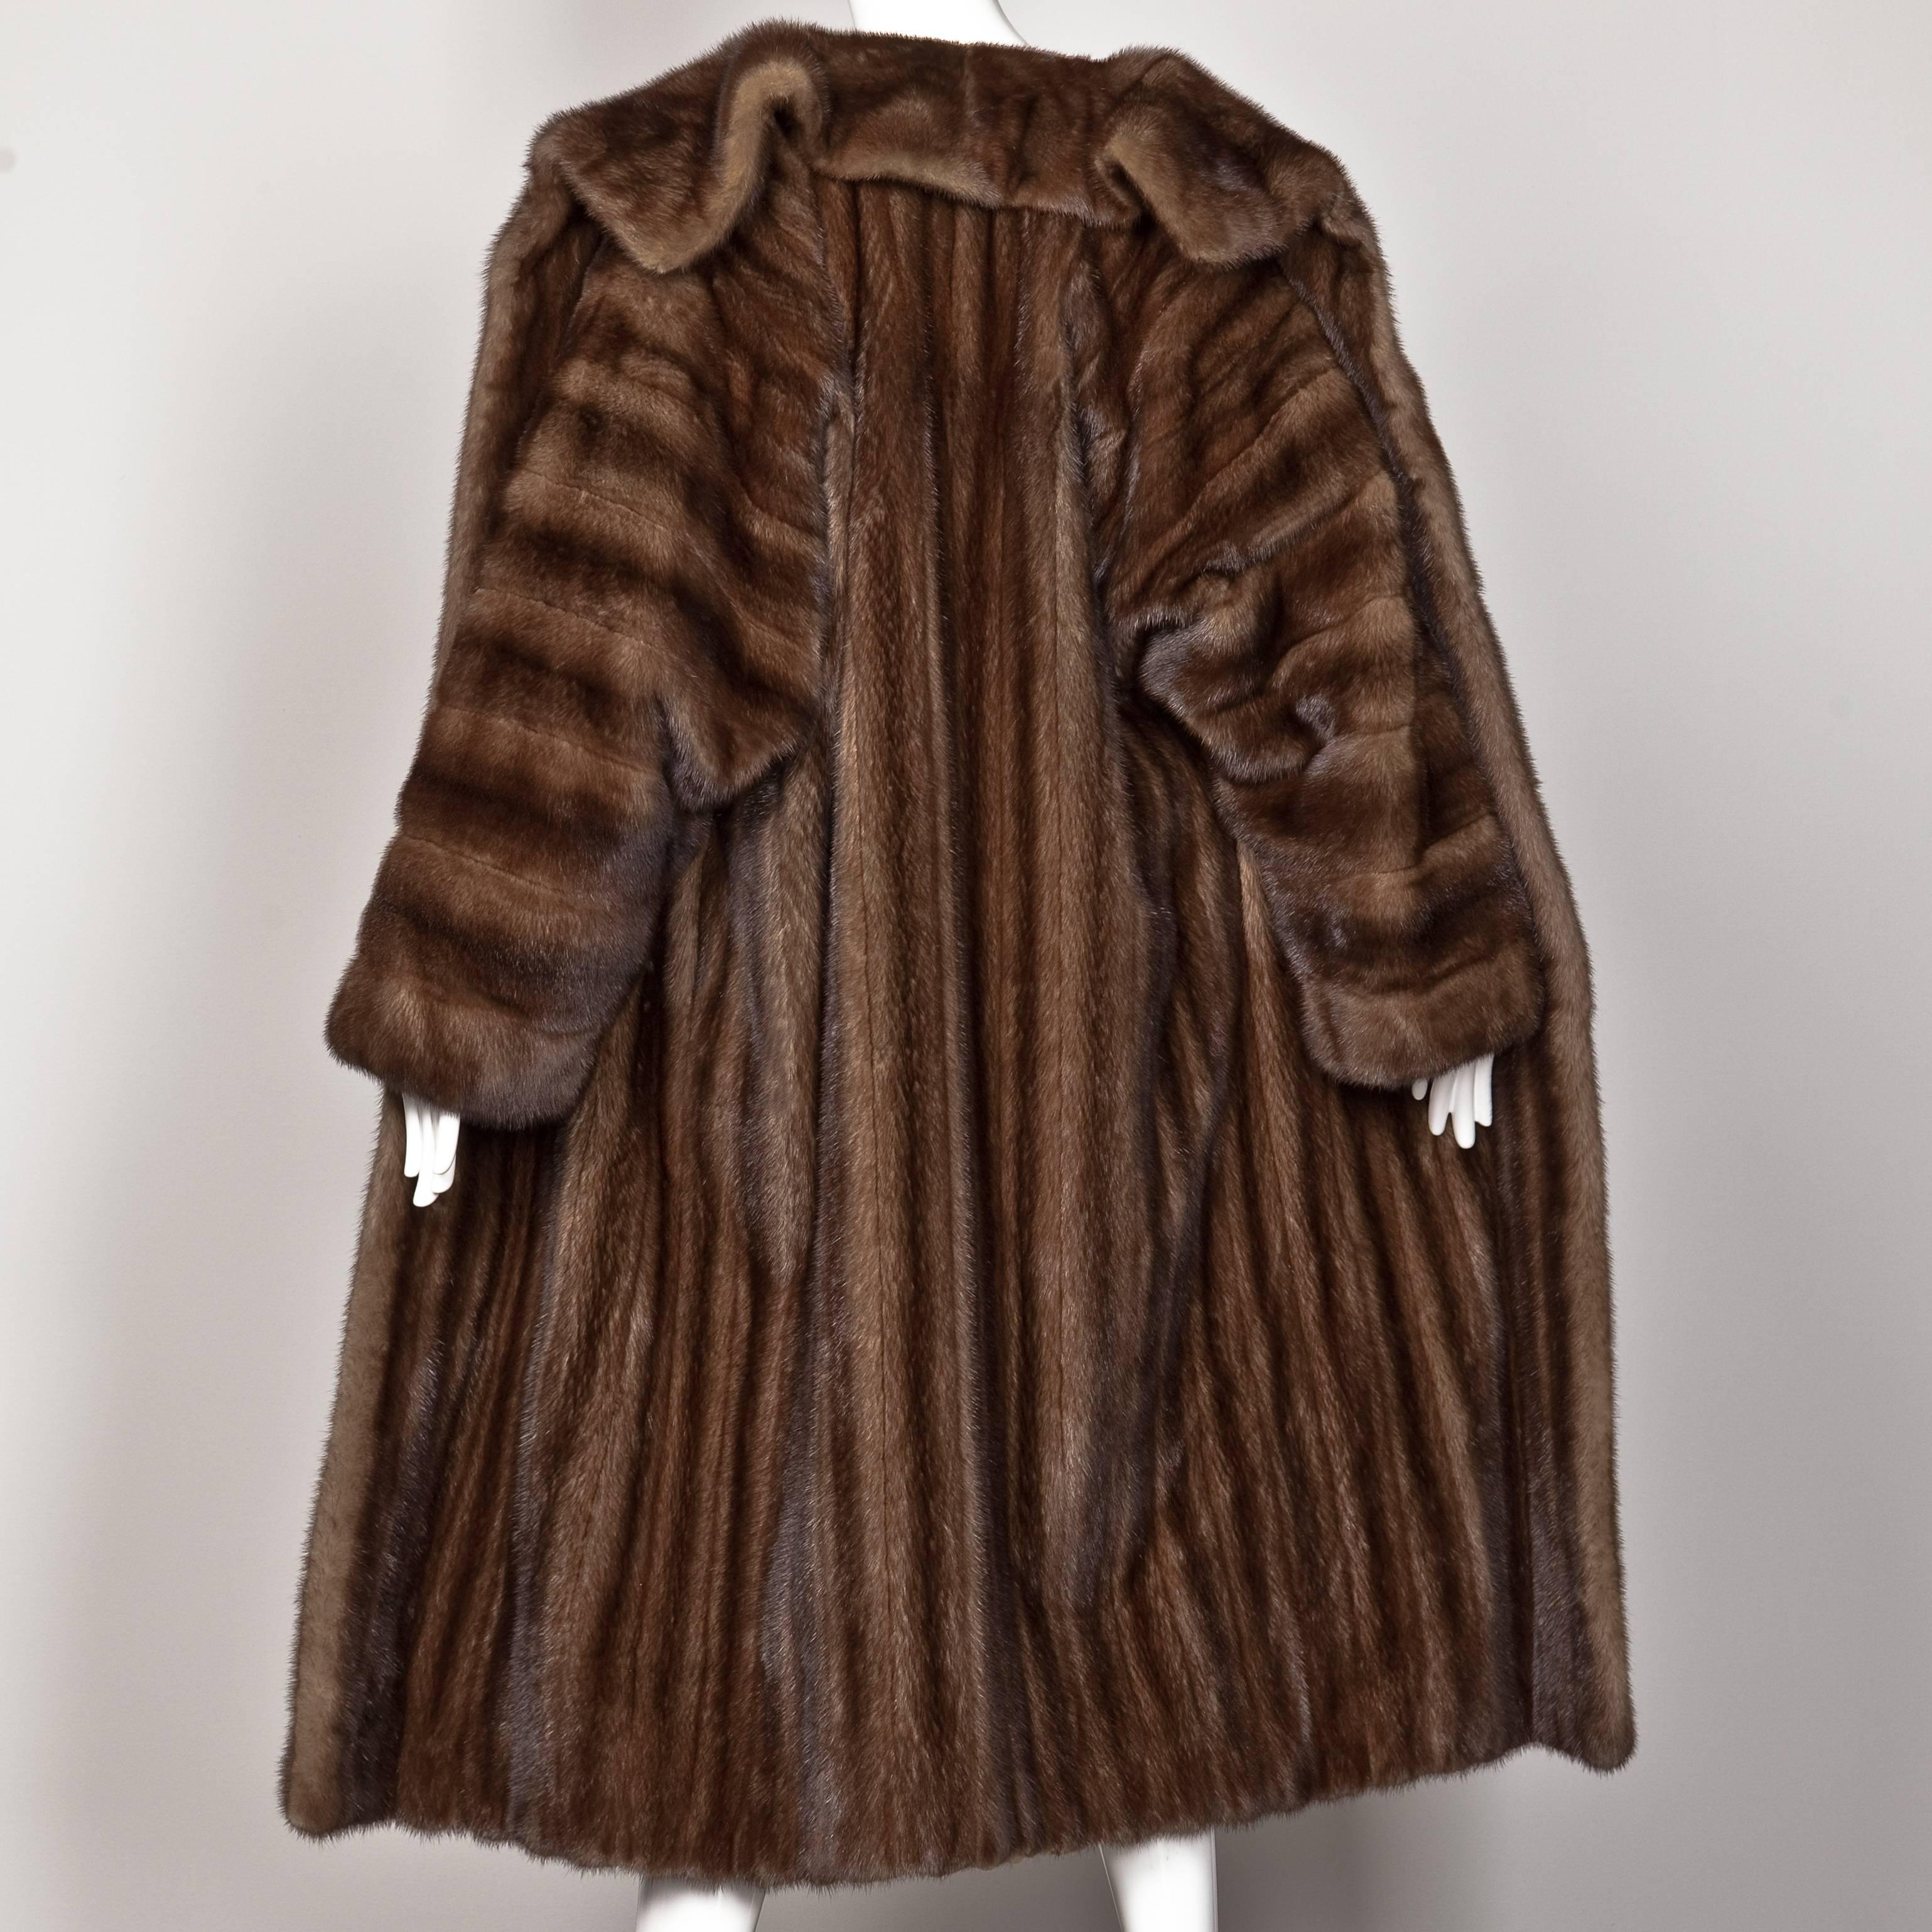 what's the most expensive fur coat